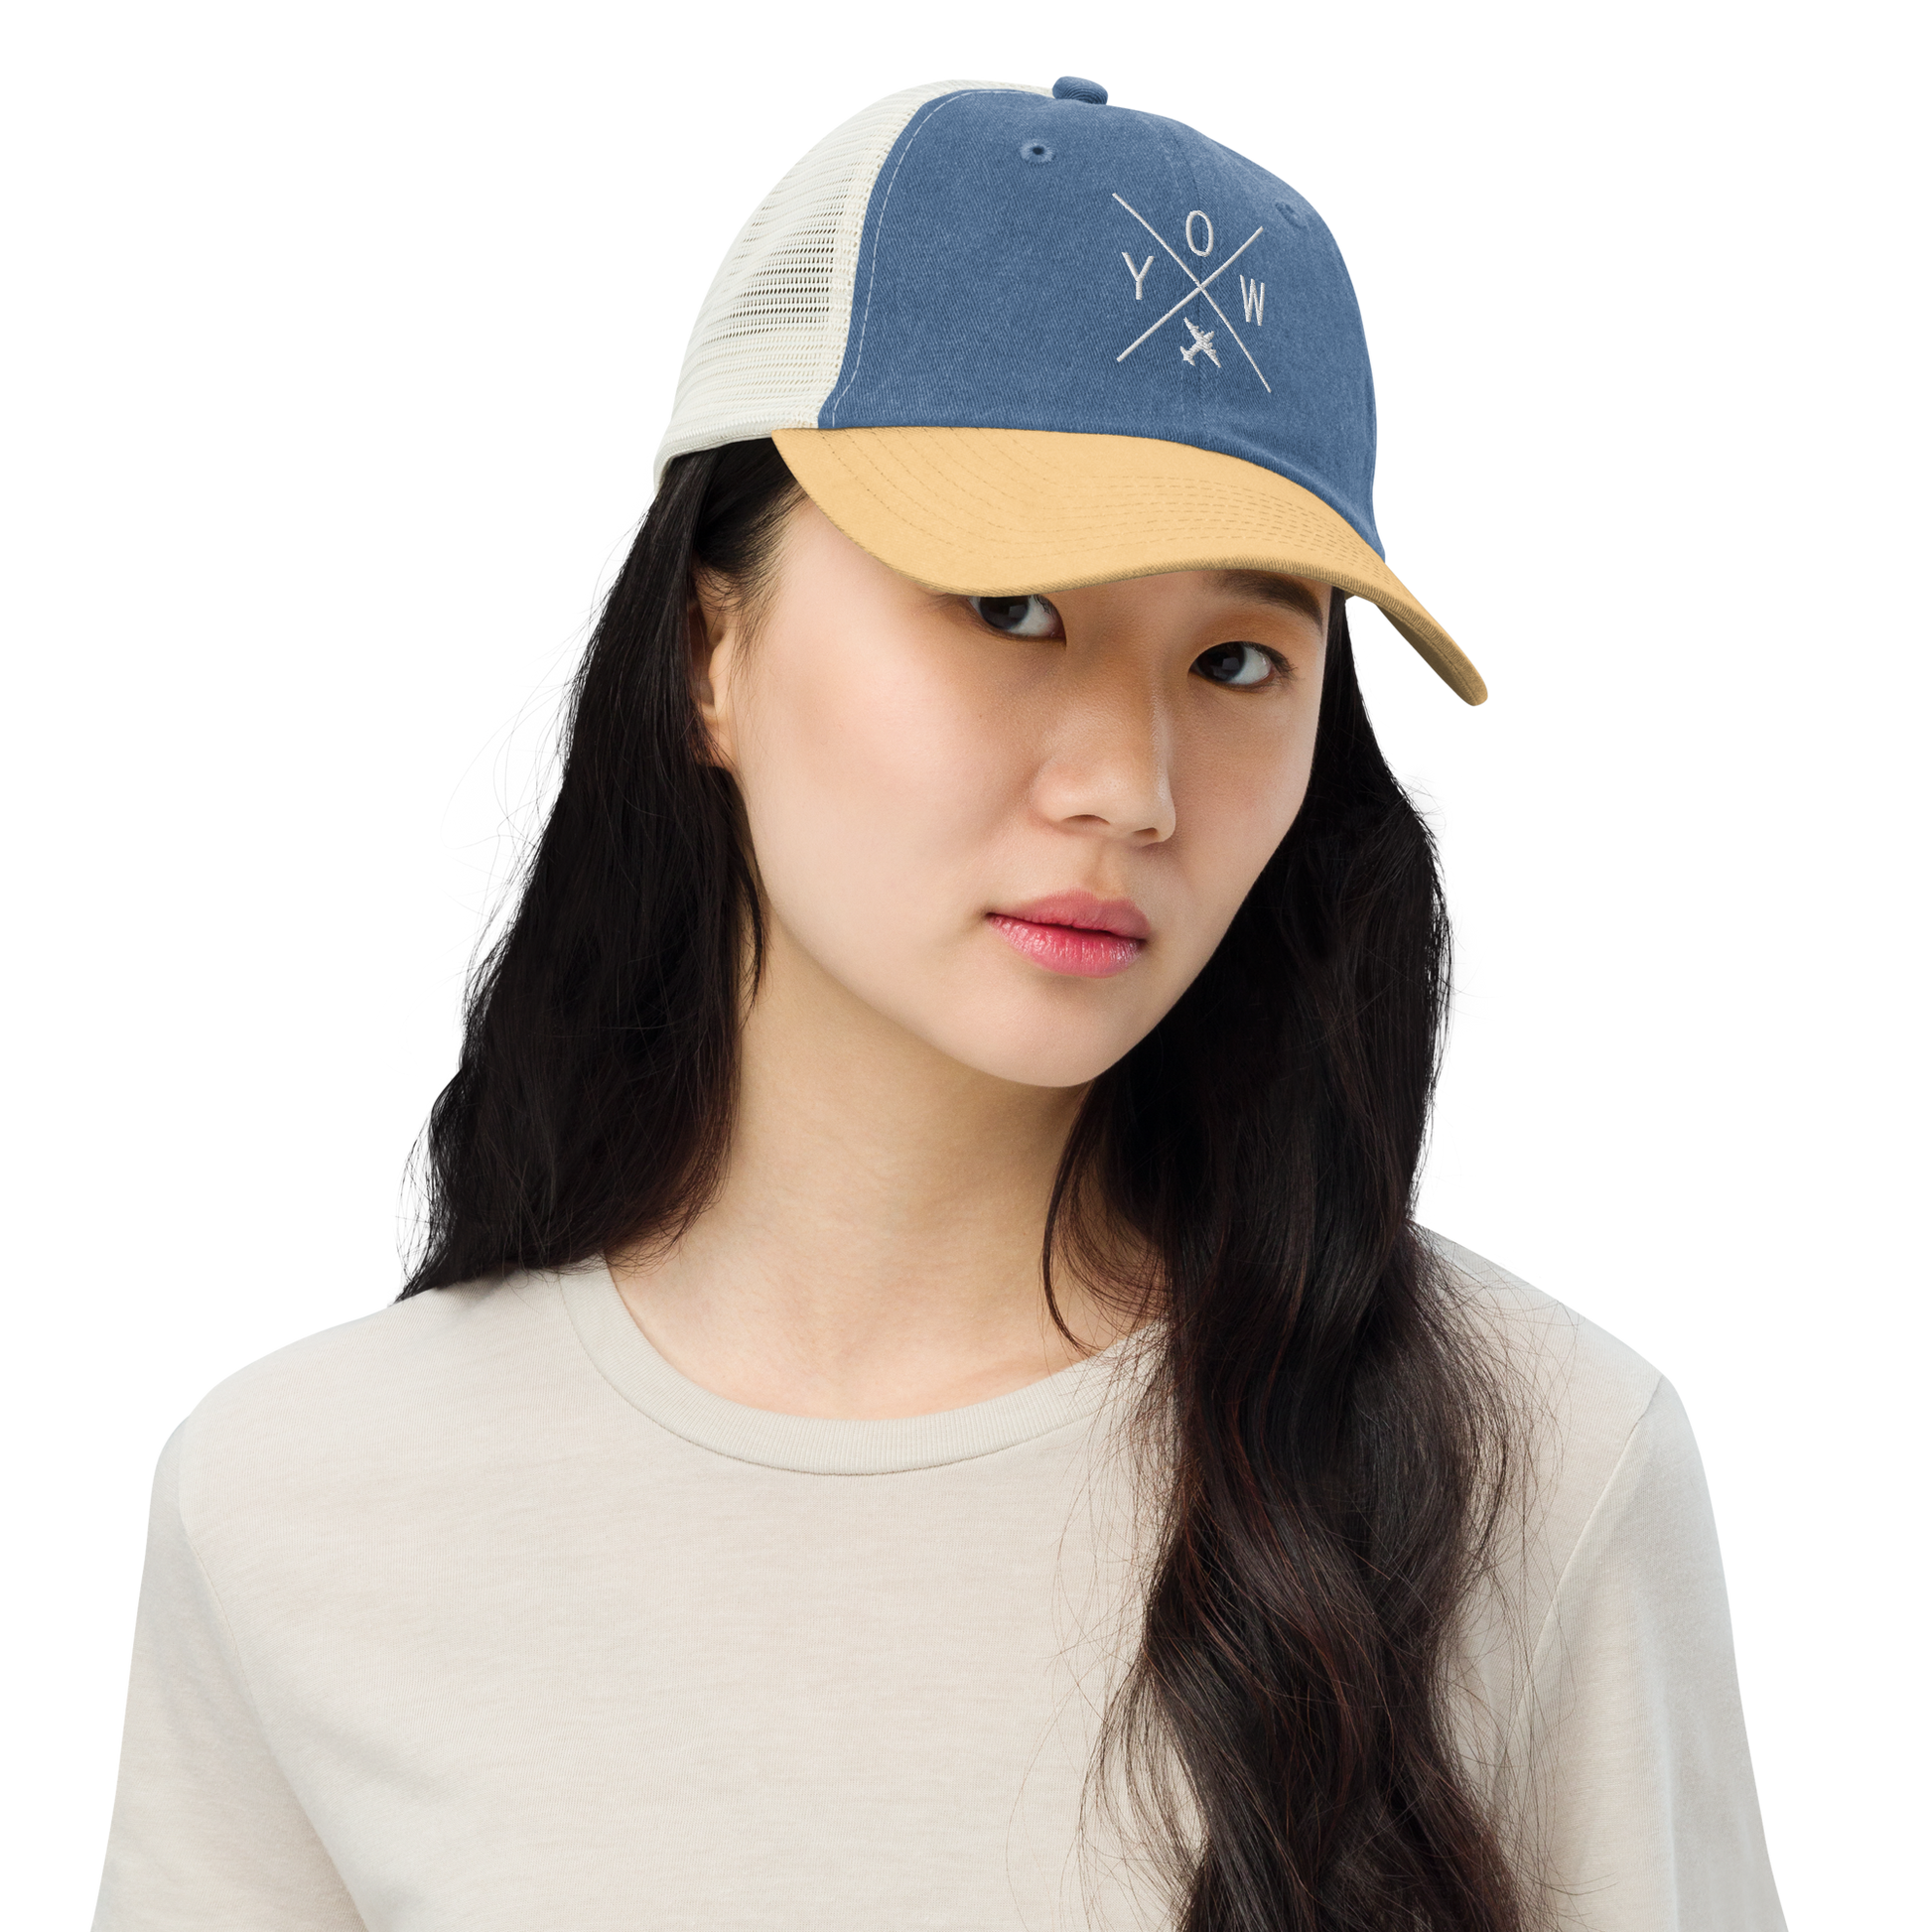 YHM Designs - YOW Ottawa Pigment-Dyed Trucker Cap - Crossed-X Design with Airport Code and Vintage Propliner - White Embroidery - Image 03